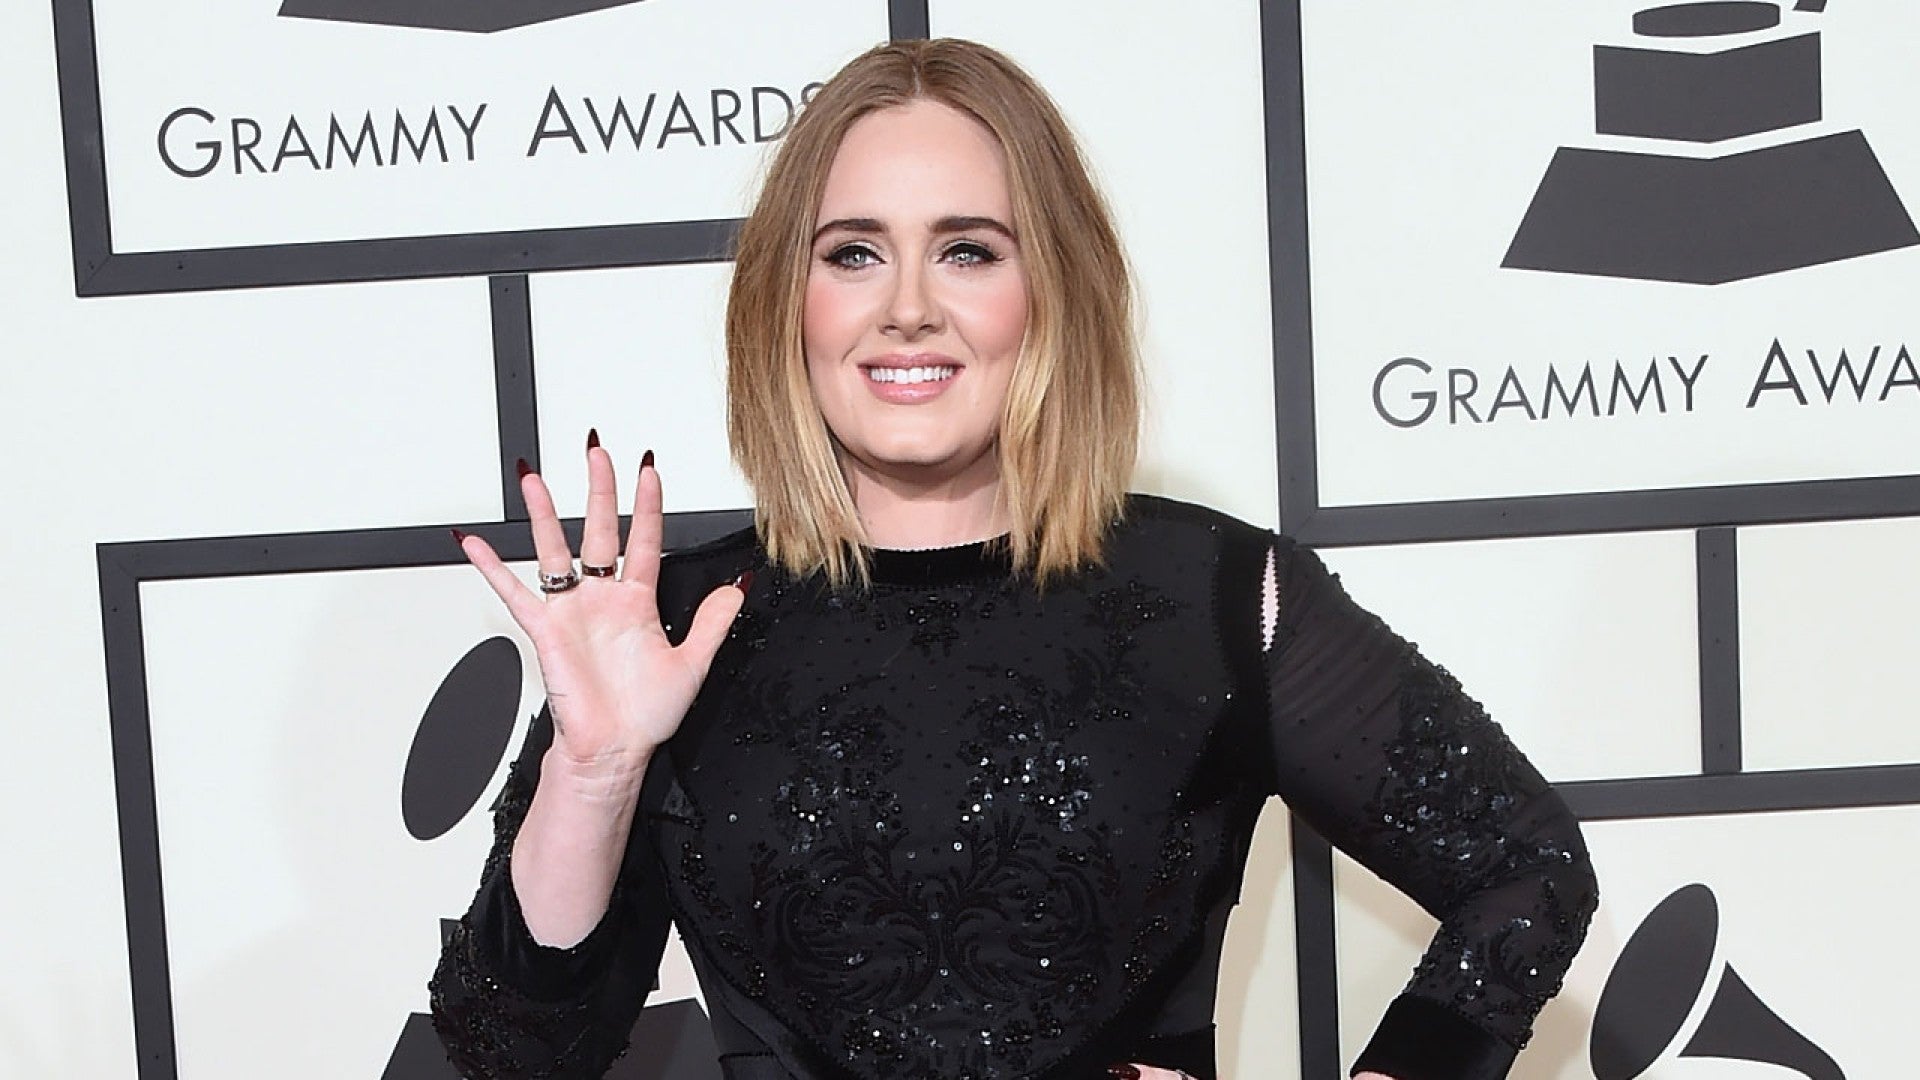 From Adele to Kim Kardashian: 14 of the biggest red carpet moments